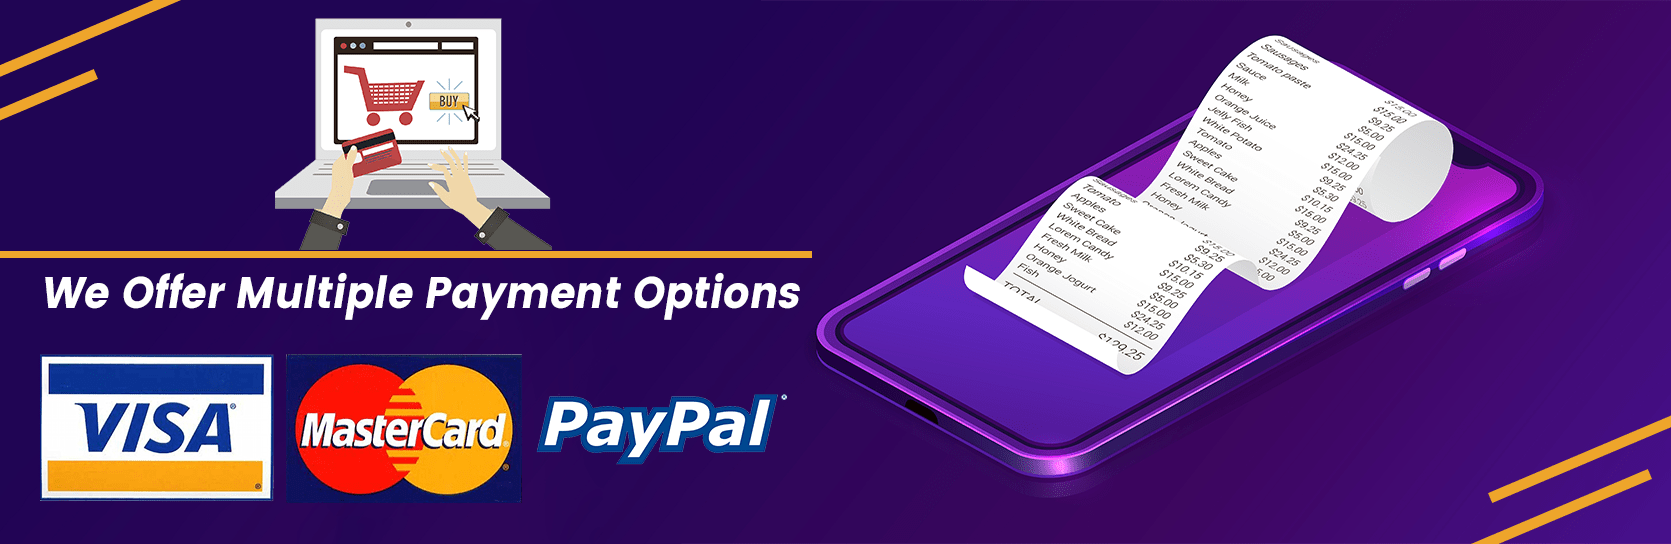 We Offer multiple payment options